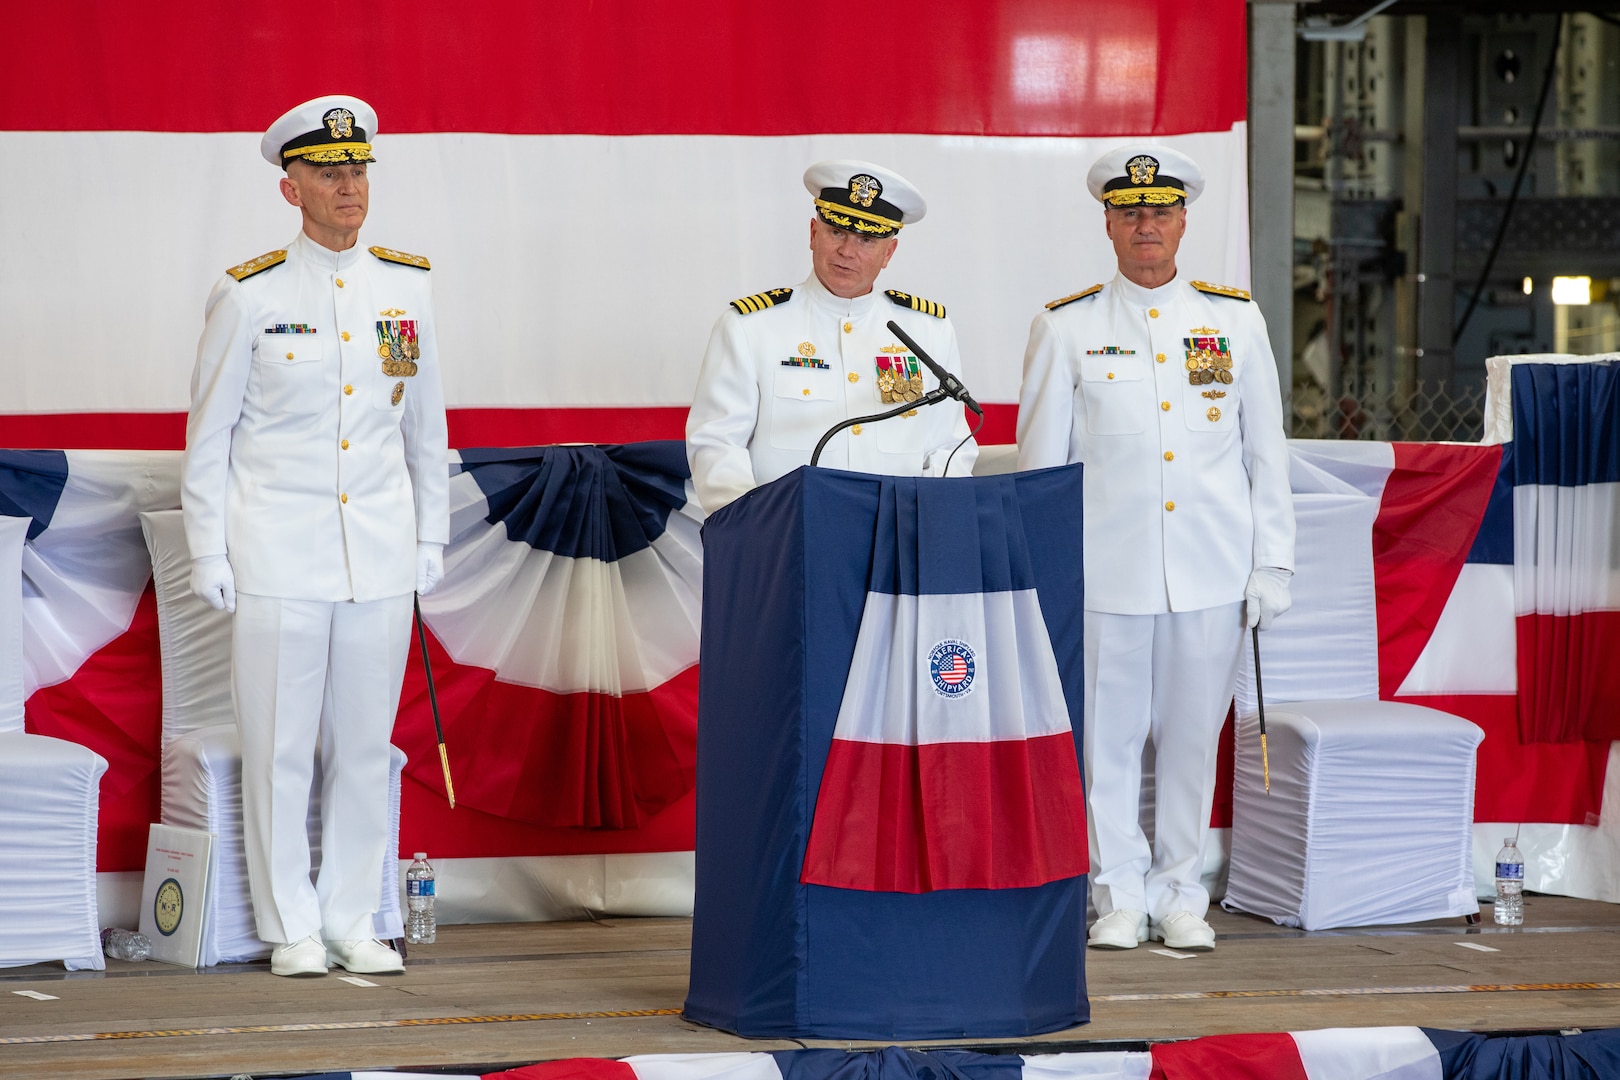 Capt. Jip Mosman assumed command of Norfolk Naval Shipyard (NNSY) as its 111th Shipyard Commander during the Change of Command Ceremony June 29.